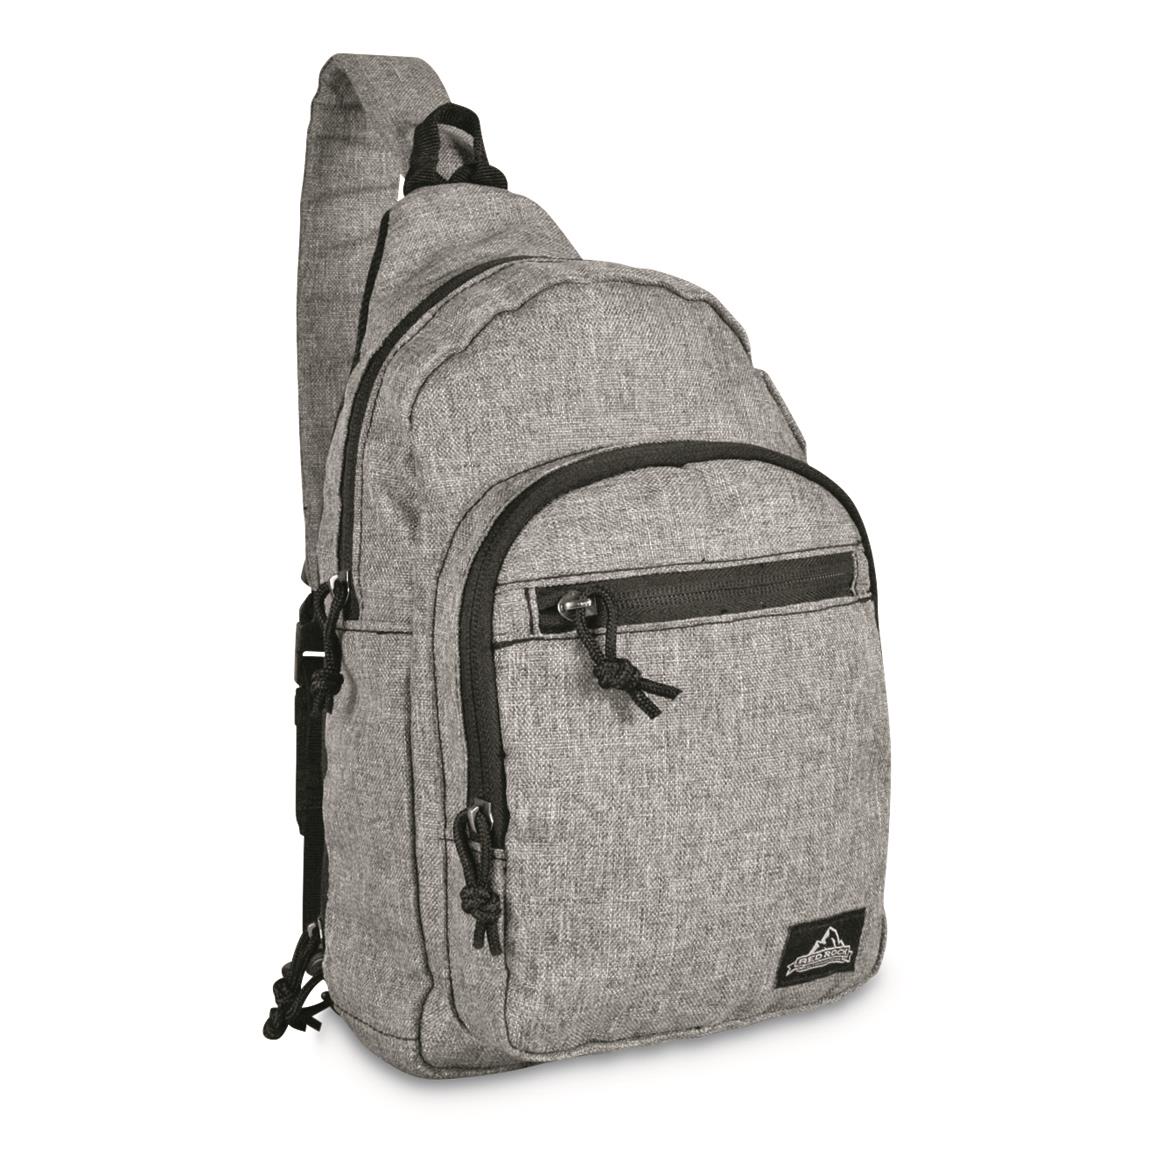 Red Rock Outdoor Gear 4L Transit Sling Pack, Gray